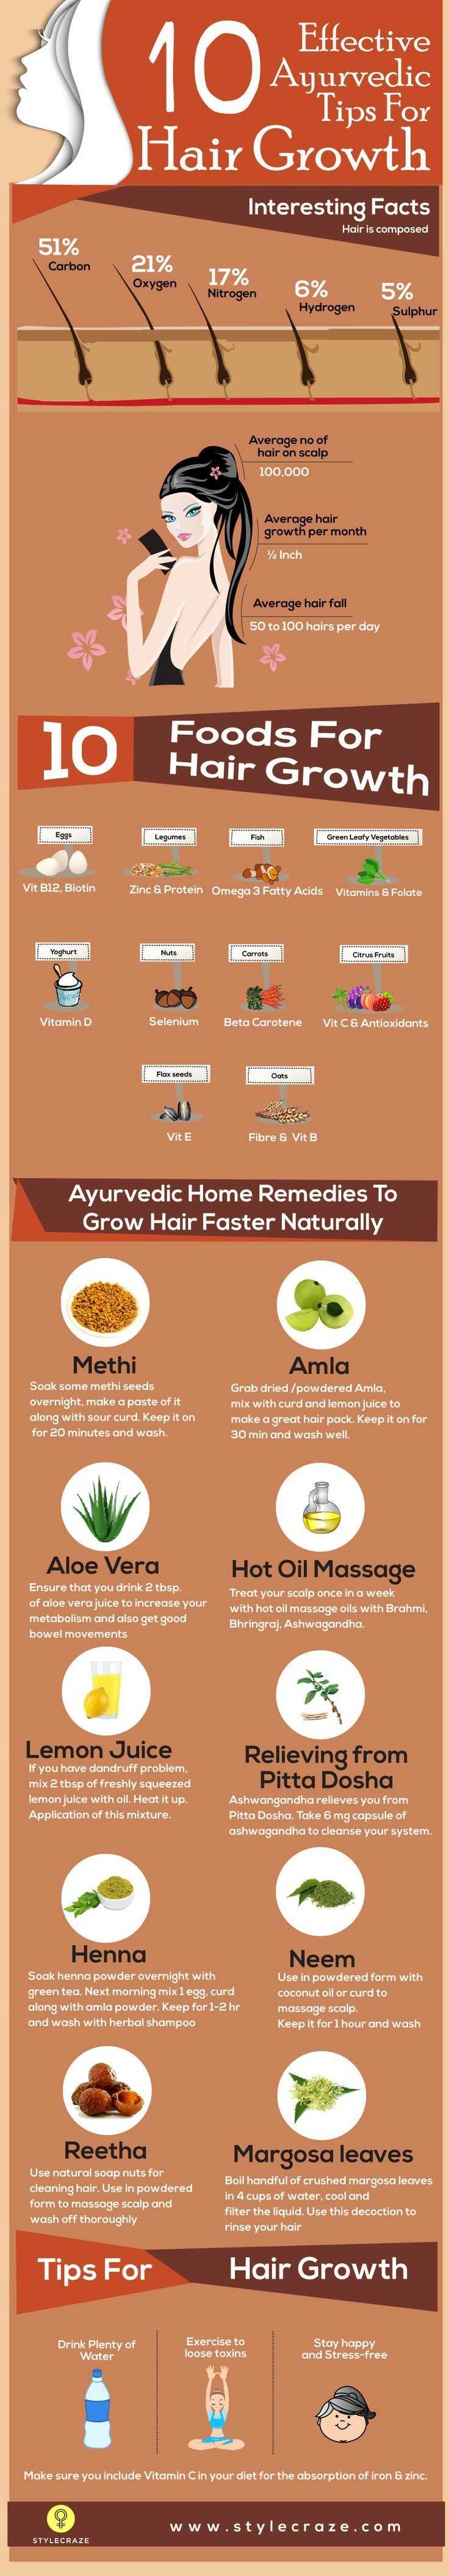 10 Effective Ayurvedic Tips For Hair Growth